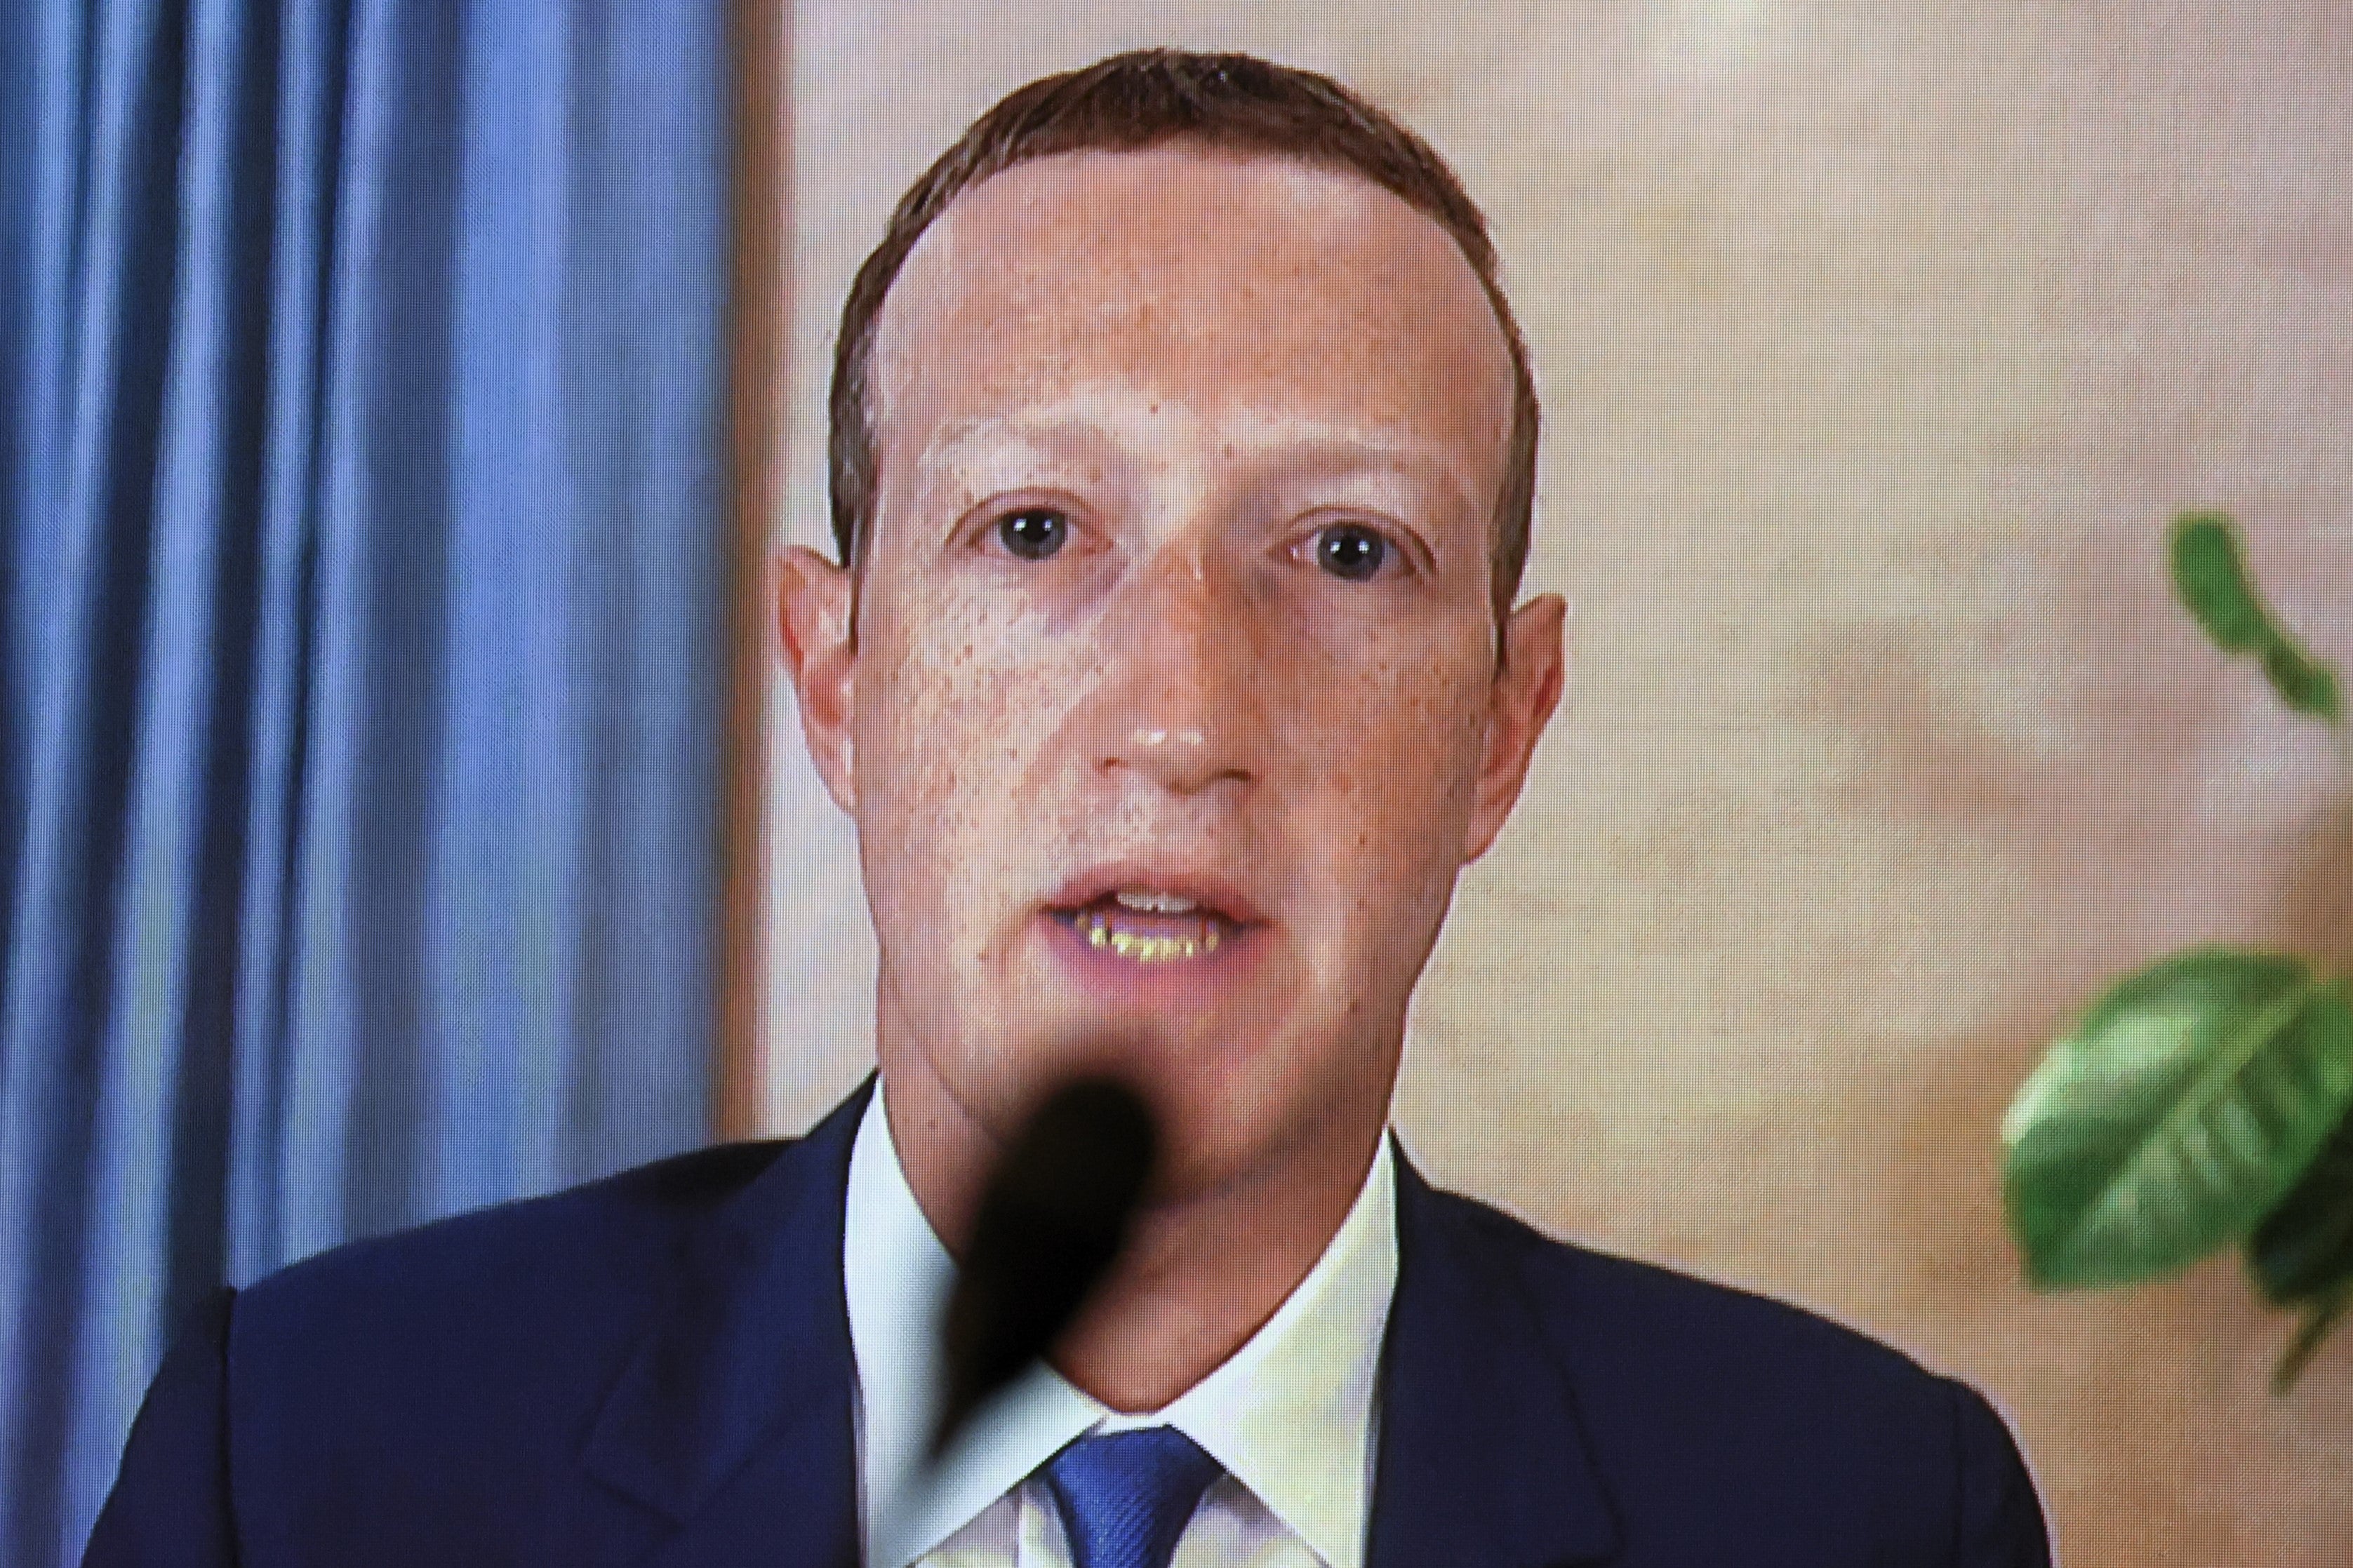 Meta CEO Mark Zuckerberg testifies remotely during a Senate Judiciary Committee hearing on Capitol Hill on 17 November, 2020 in Washington, DC